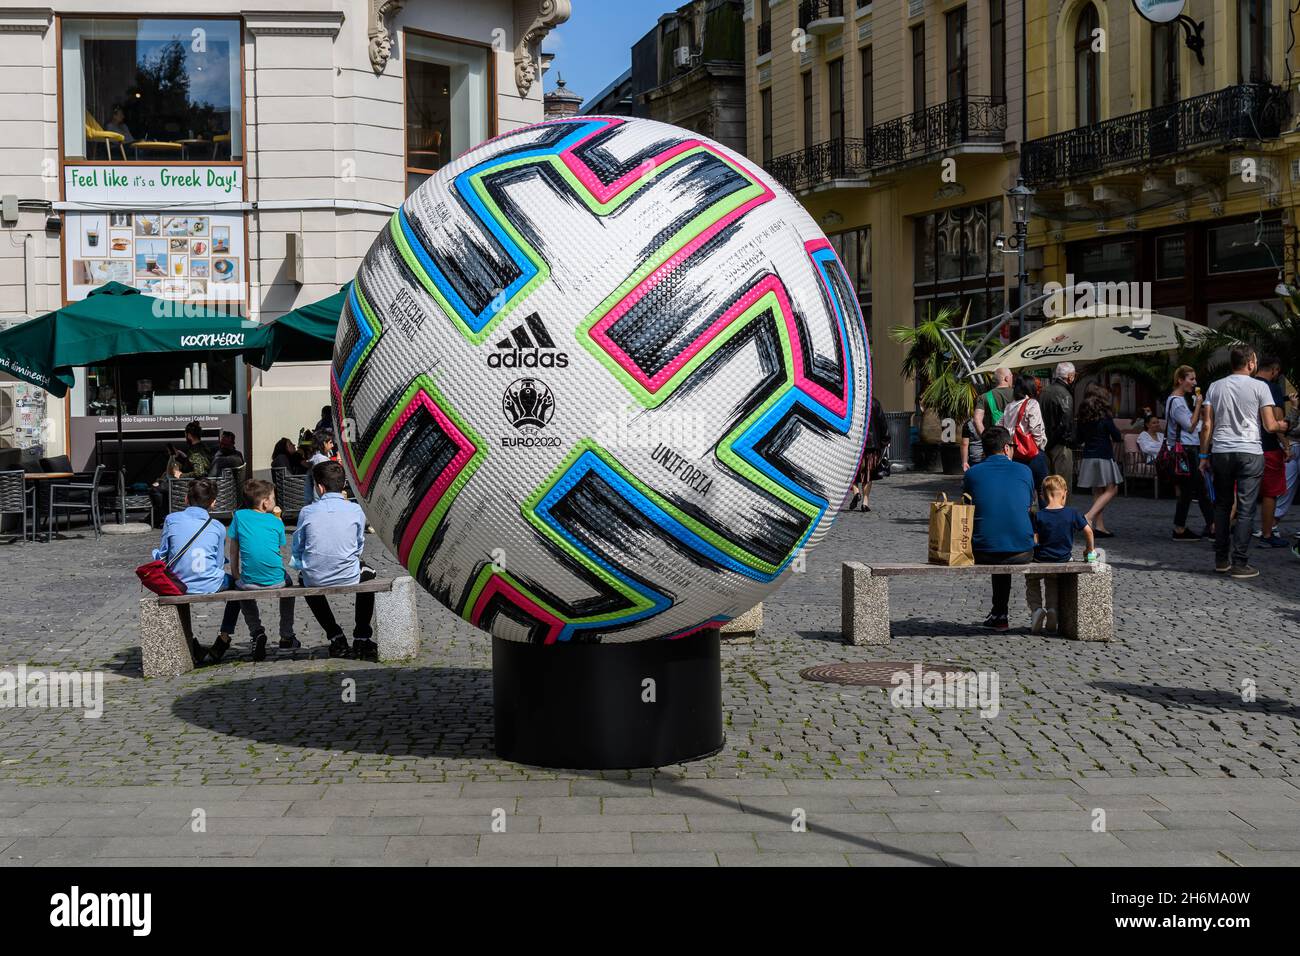 Bucharest, Romania, 5 June 2021 - Official Adidas Uniforia large match ball  is displayed in a street in the old city center as of a host city for UEFA  Stock Photo - Alamy